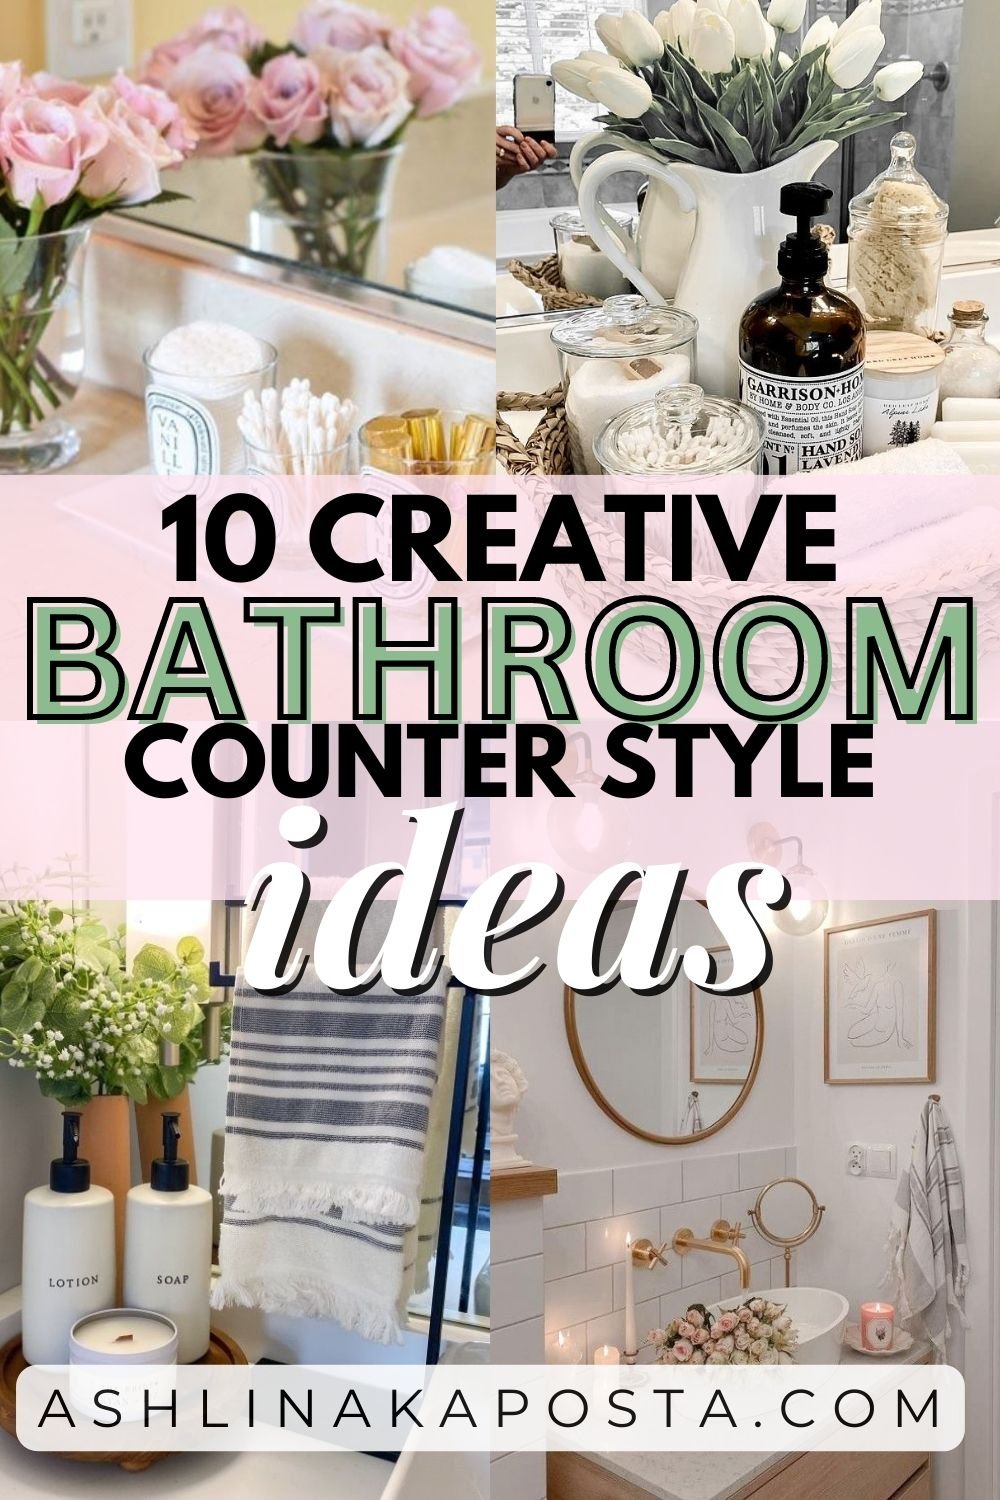 The Ultimate Guide to Decorating Your Bathroom Counter